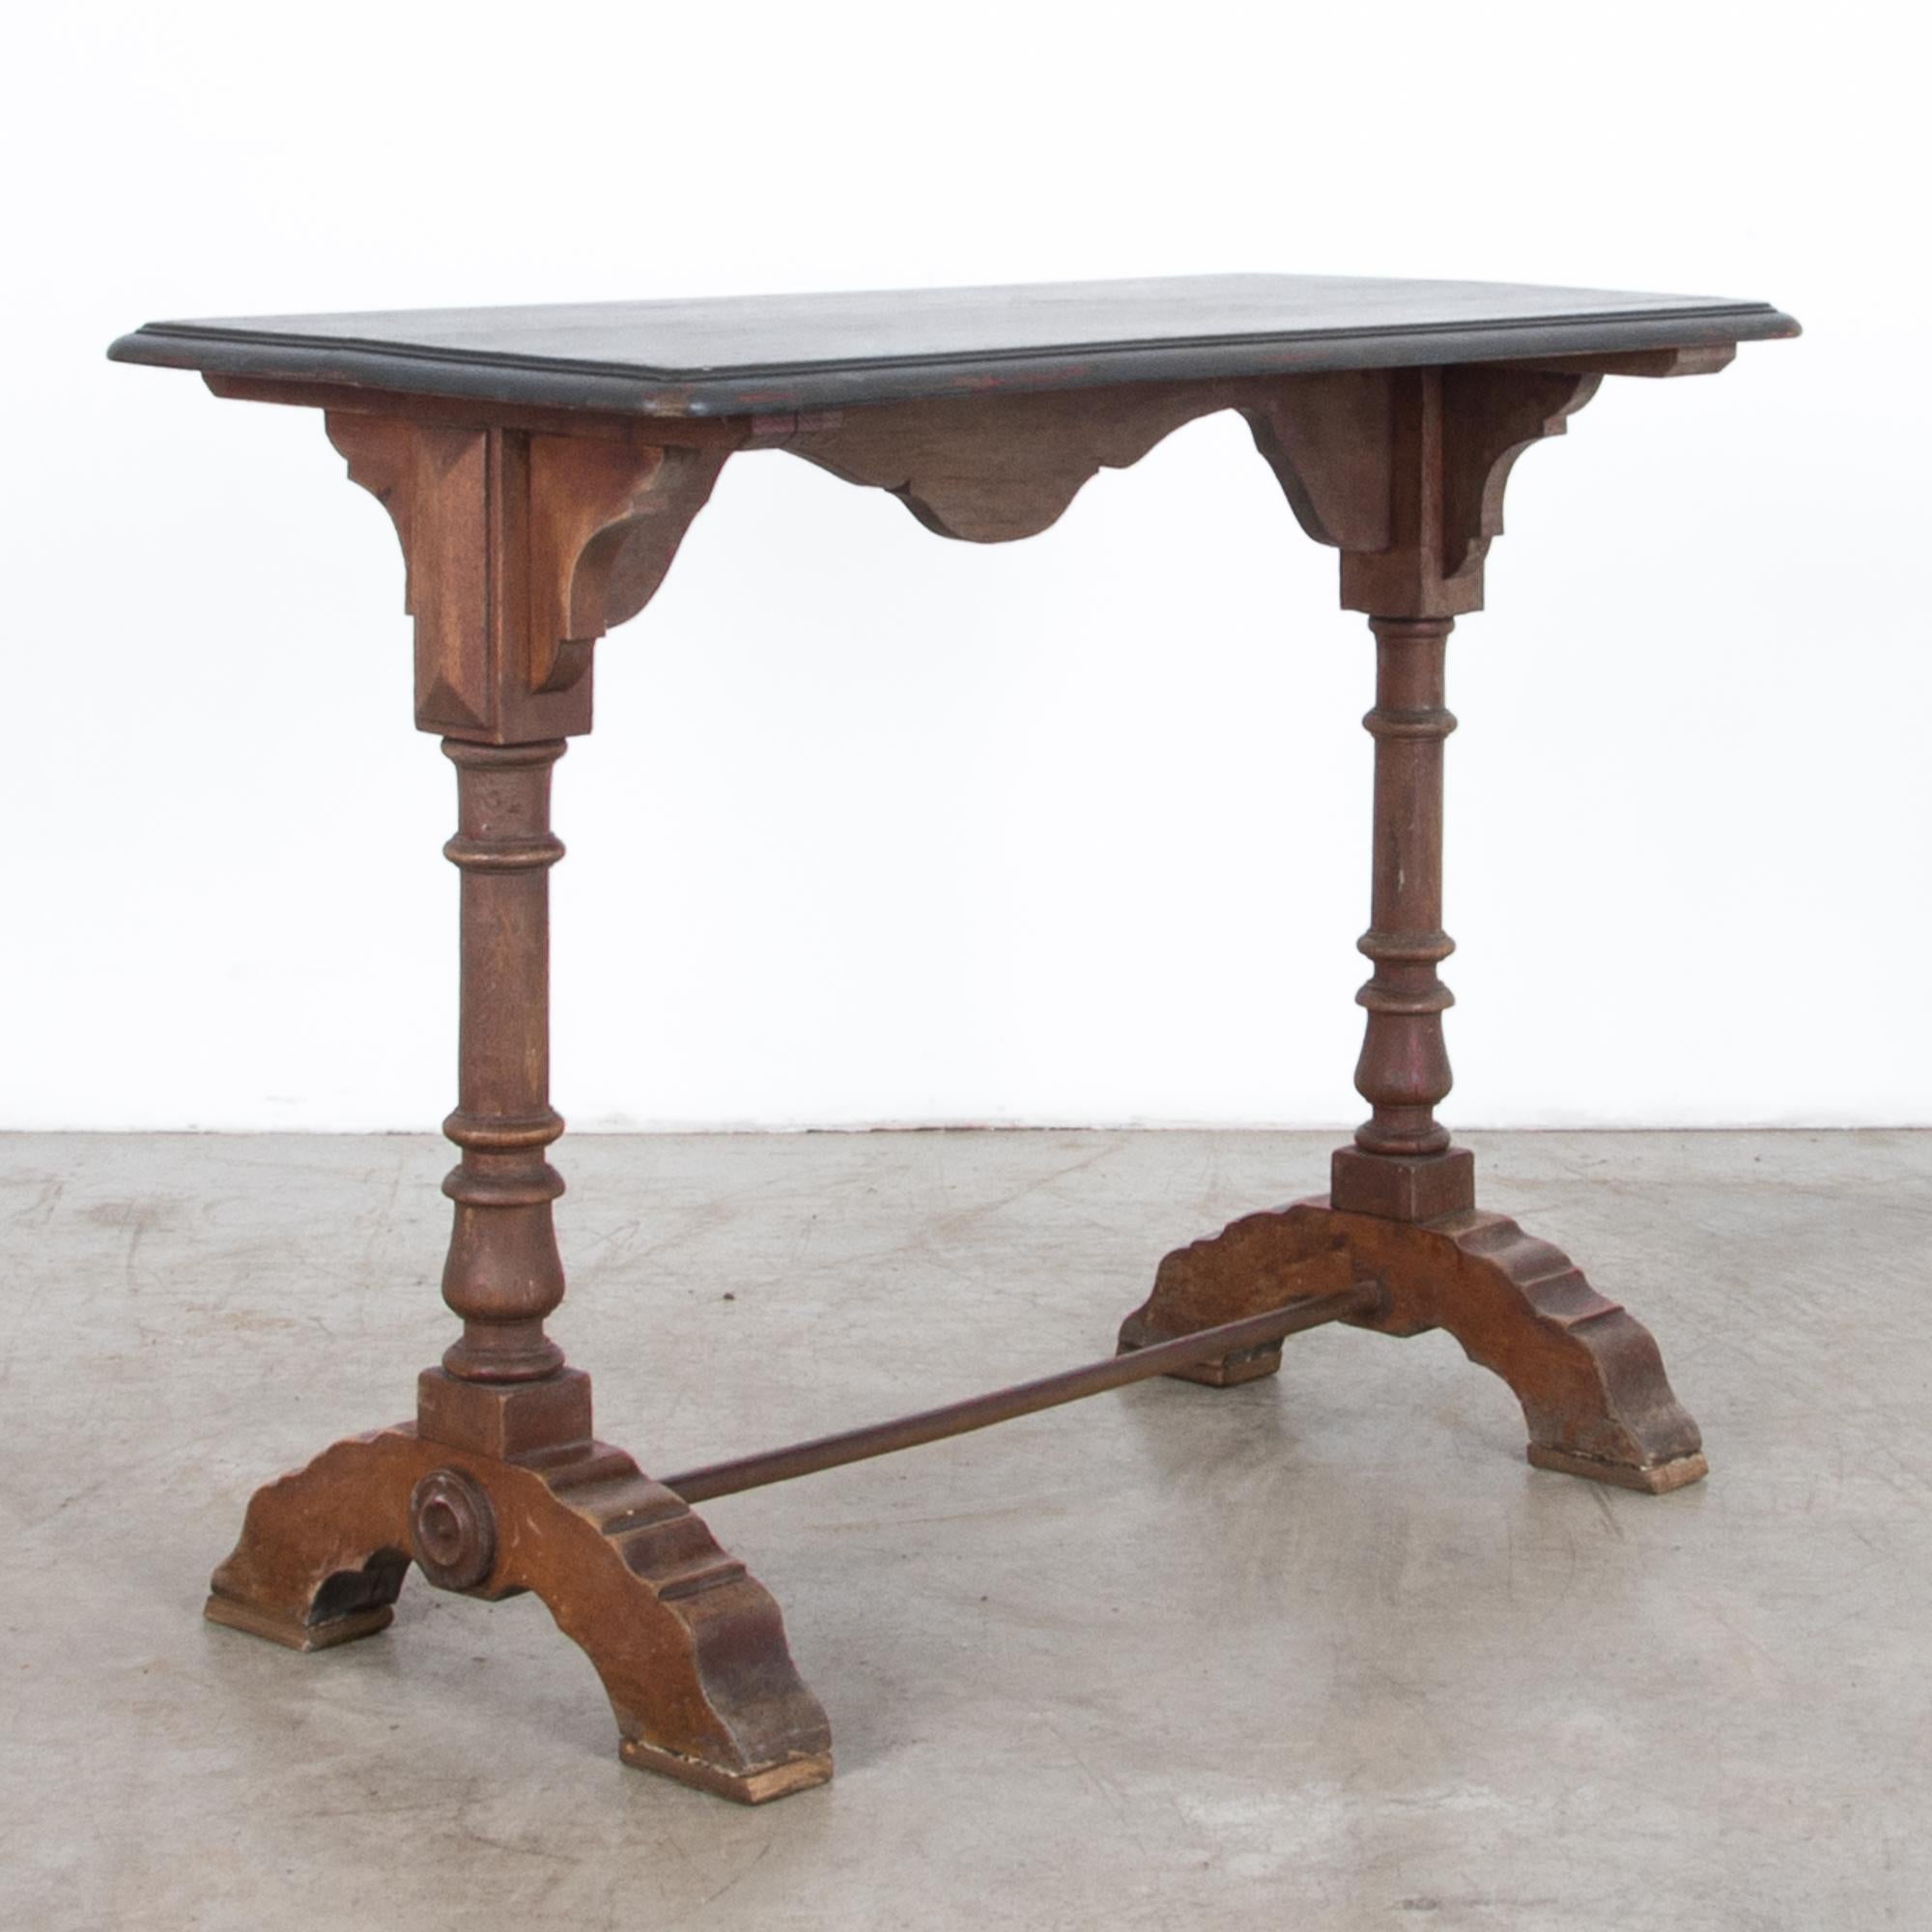 This charming 1900s French wooden bistro table perfectly captures the essence of Parisian café culture. The tabletop, painted in a sophisticated matte black, contrasts beautifully with the warm wooden tones of the base. Intricate carvings and the